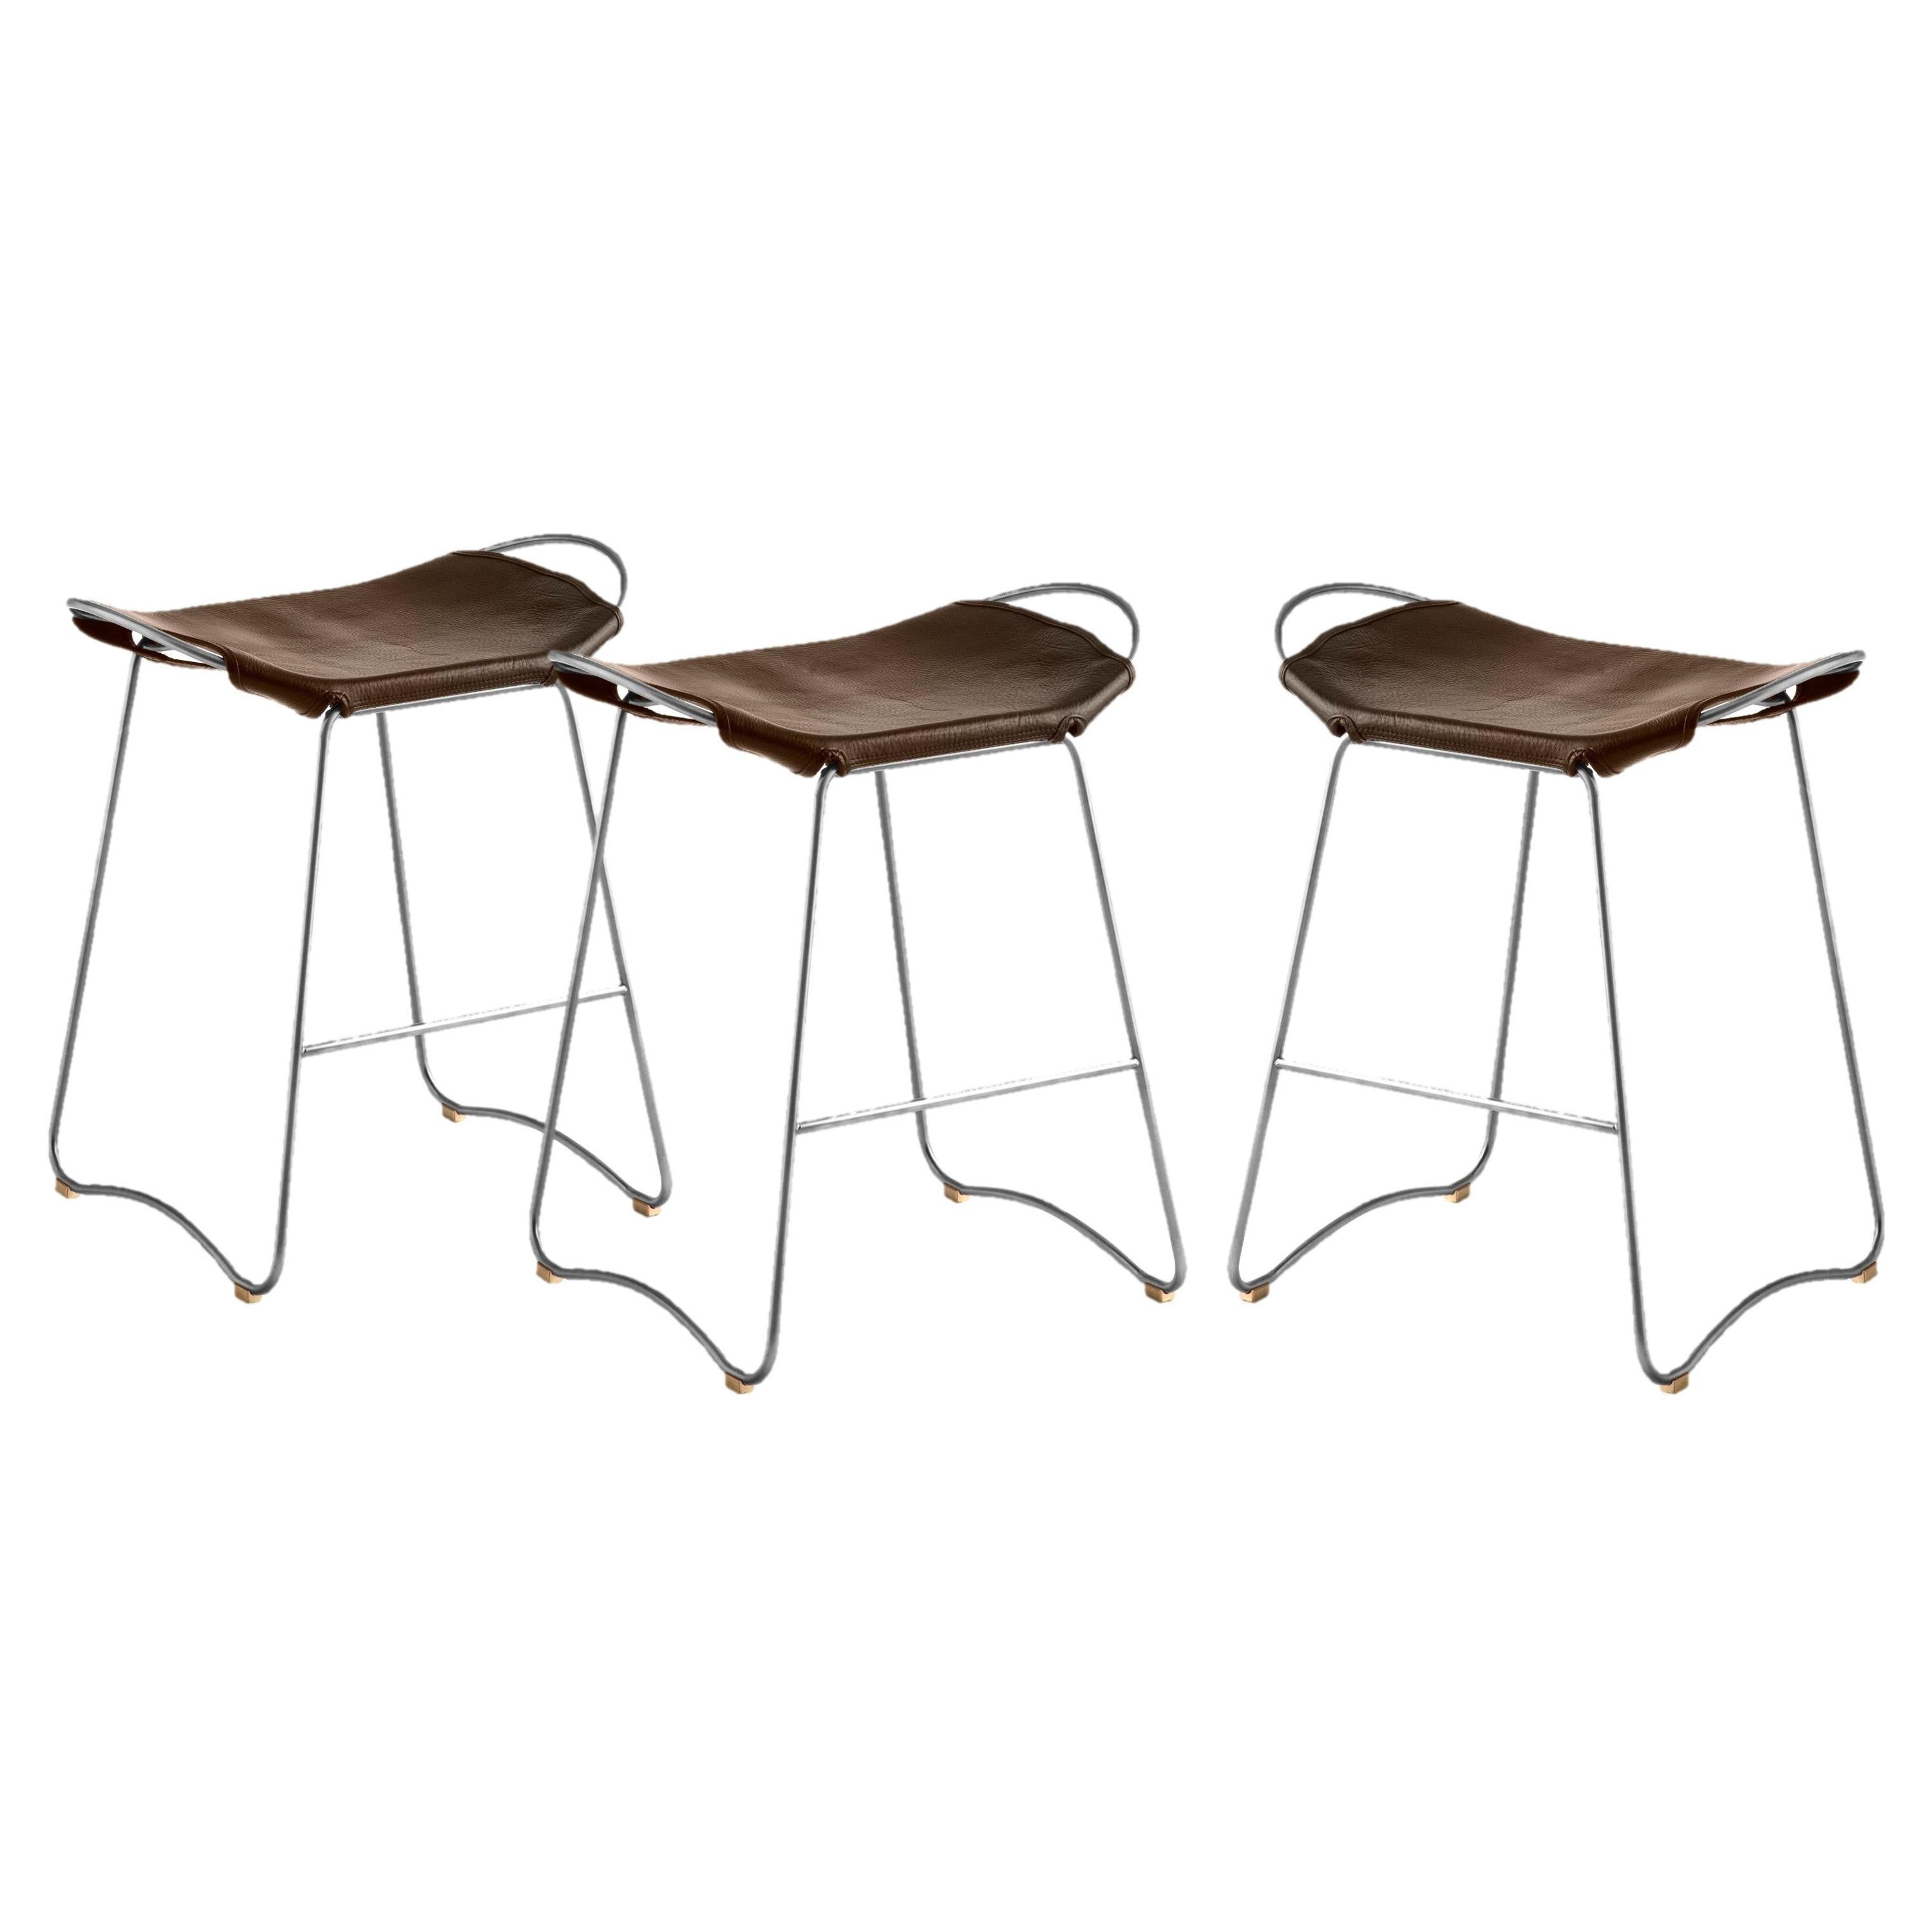 Set of 3 Organic Contemporary Bar Stool Old Silver Metal & Dark Brown Leather